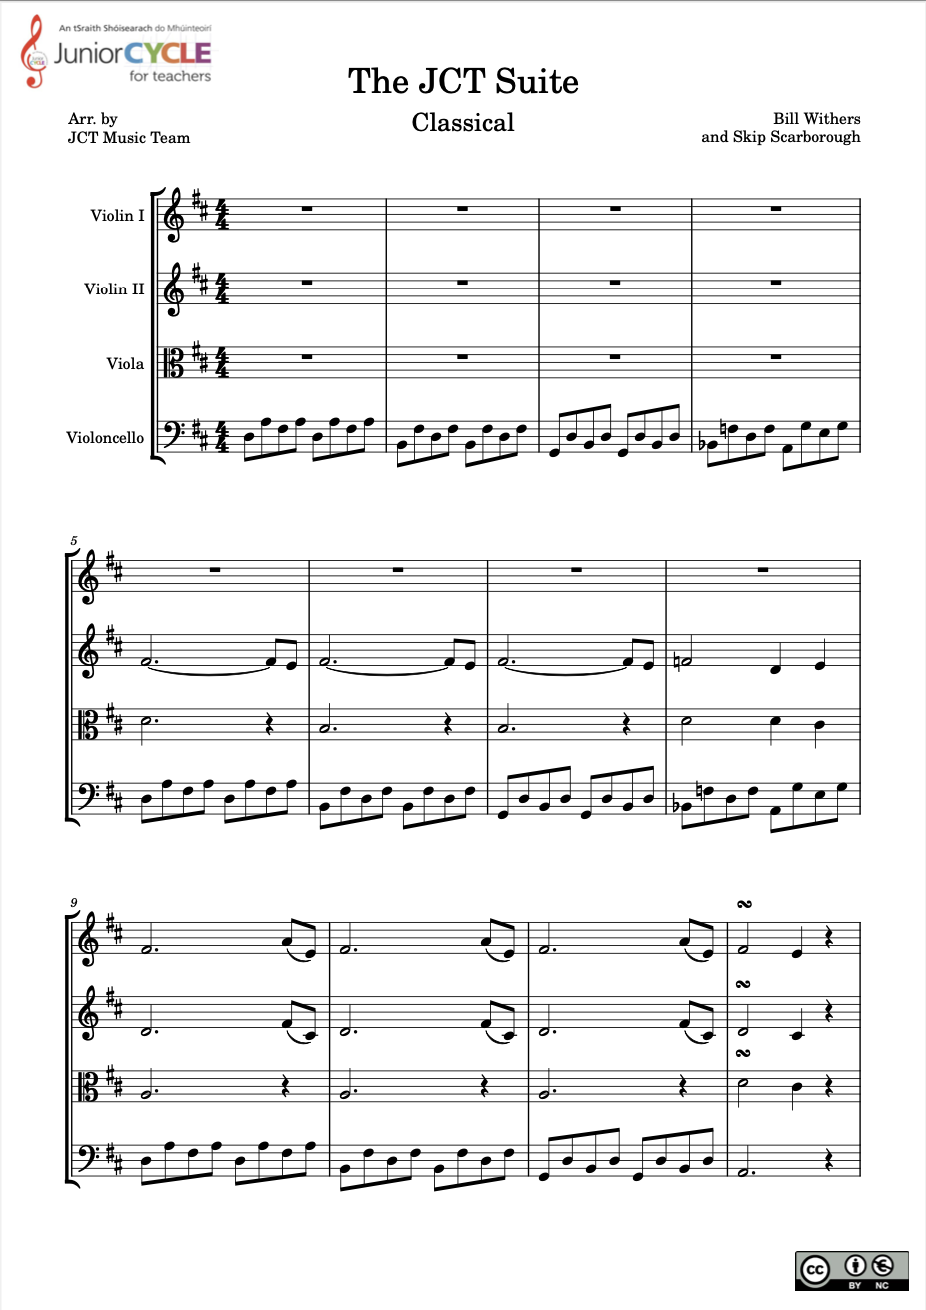 CLASSICAL: Possible 1st Year Learning - String Quartet